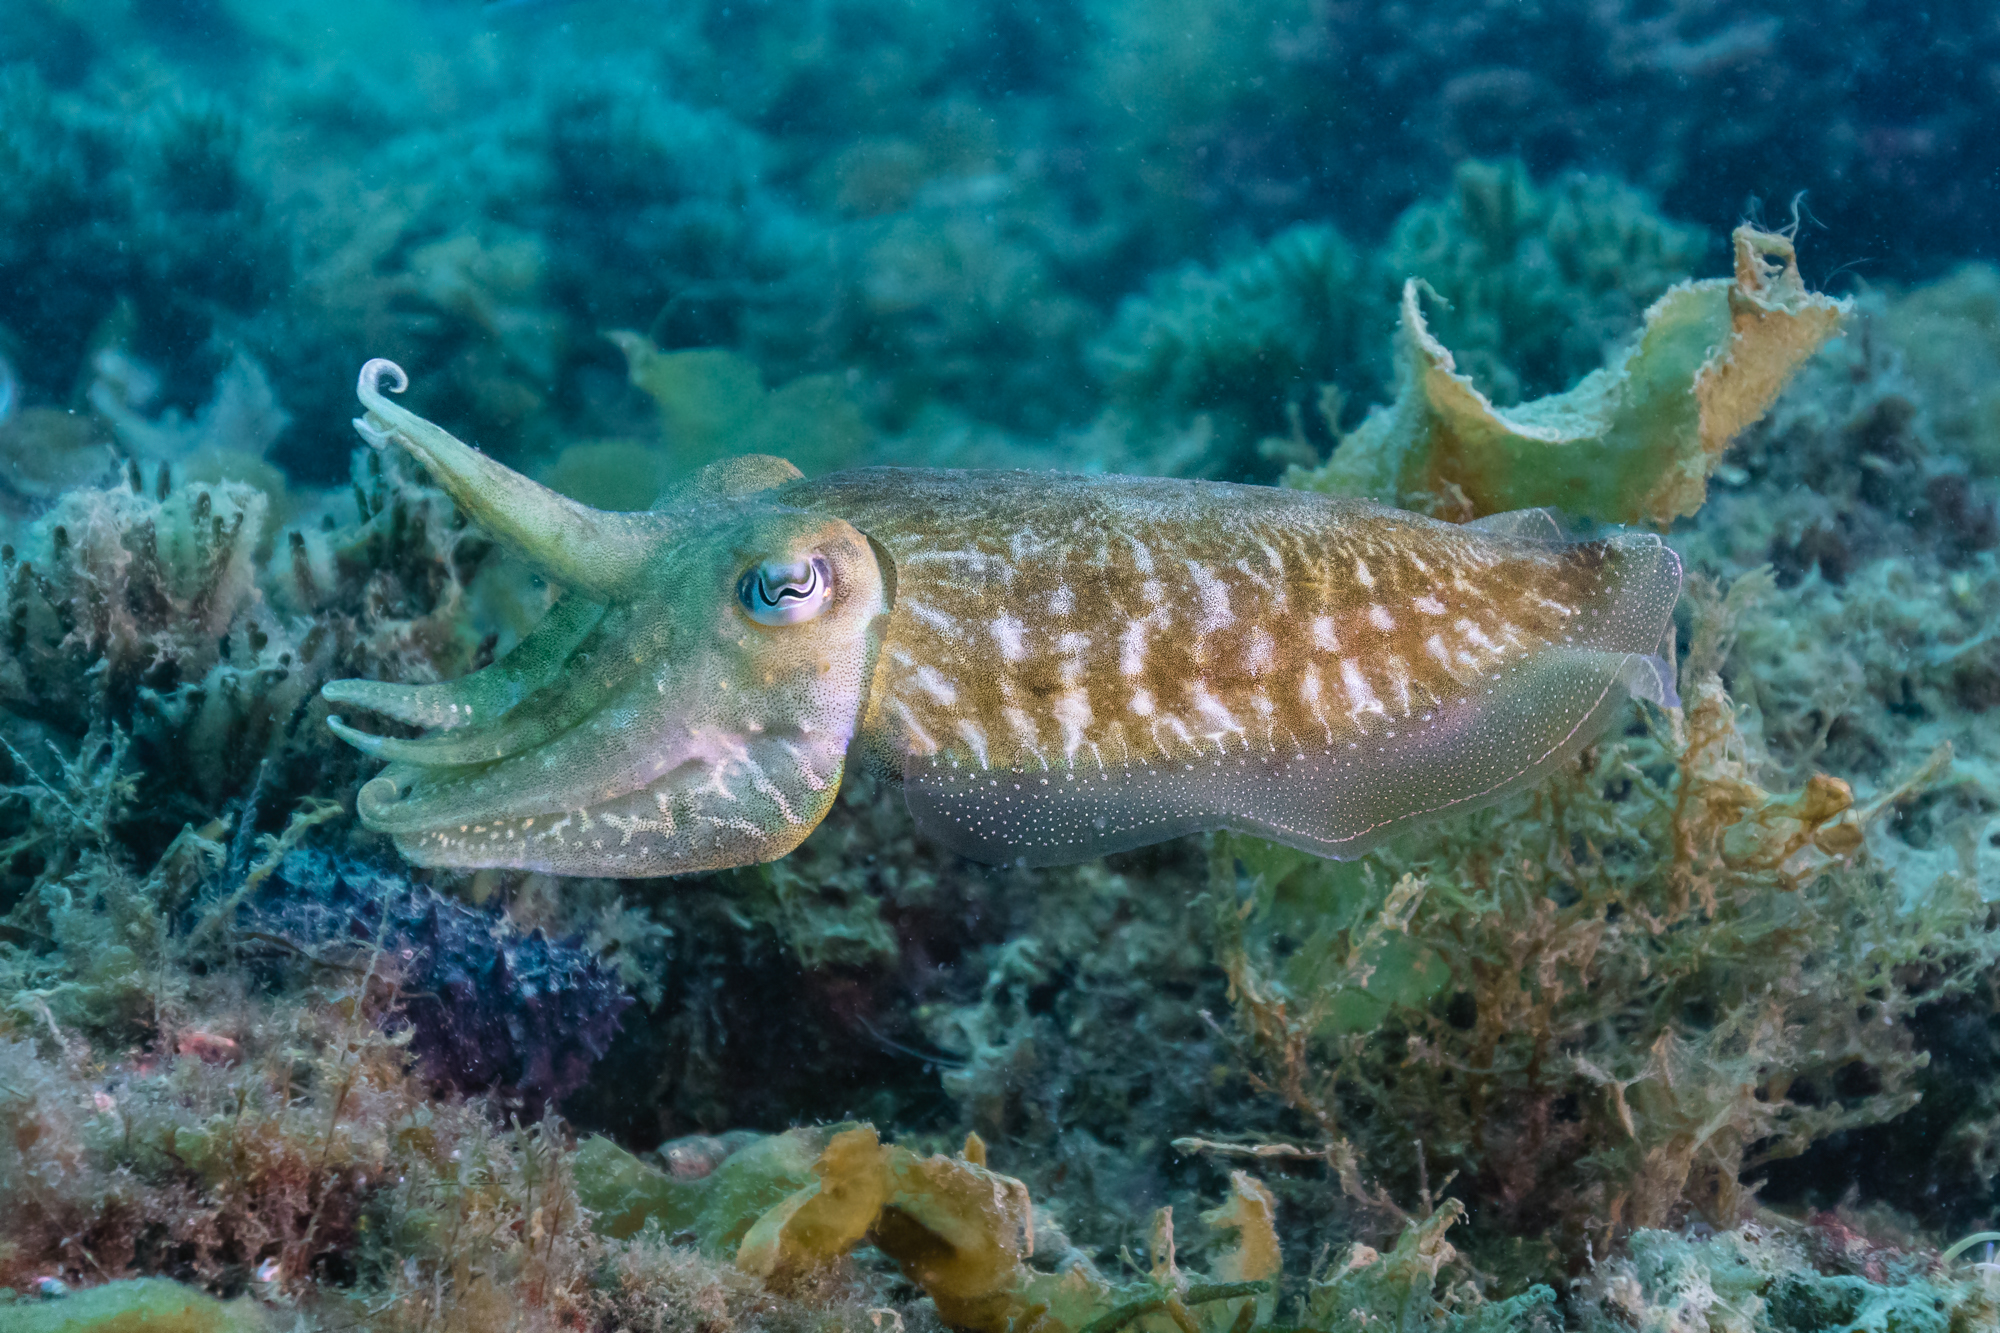 Common cuttlefish (Sepia officinalis), Arrábida National Park, Portugal. The common cuttlefish is one of the largest and best-known cuttlefish species. They are a migratory species that spend the summer and spring inshore for spawning and then move to depths of 100 to 200m during autumn and winter. They only have a lifespan of 1–2 years and have many predators including sharks, dolphins, seals, fish, and cephalopods which includes other cuttlefish. During the day, most cuttlefish can be found buried below the substrate and fairly inactive. At night however, they are actively searching for prey and can ambush them from under the substrate. Cuttlefish are carnivorous and eat a variety of organisms including crustaceans (crabs and shrimp), small fish, molluscs (clams and snails), and sometimes other cuttlefish.